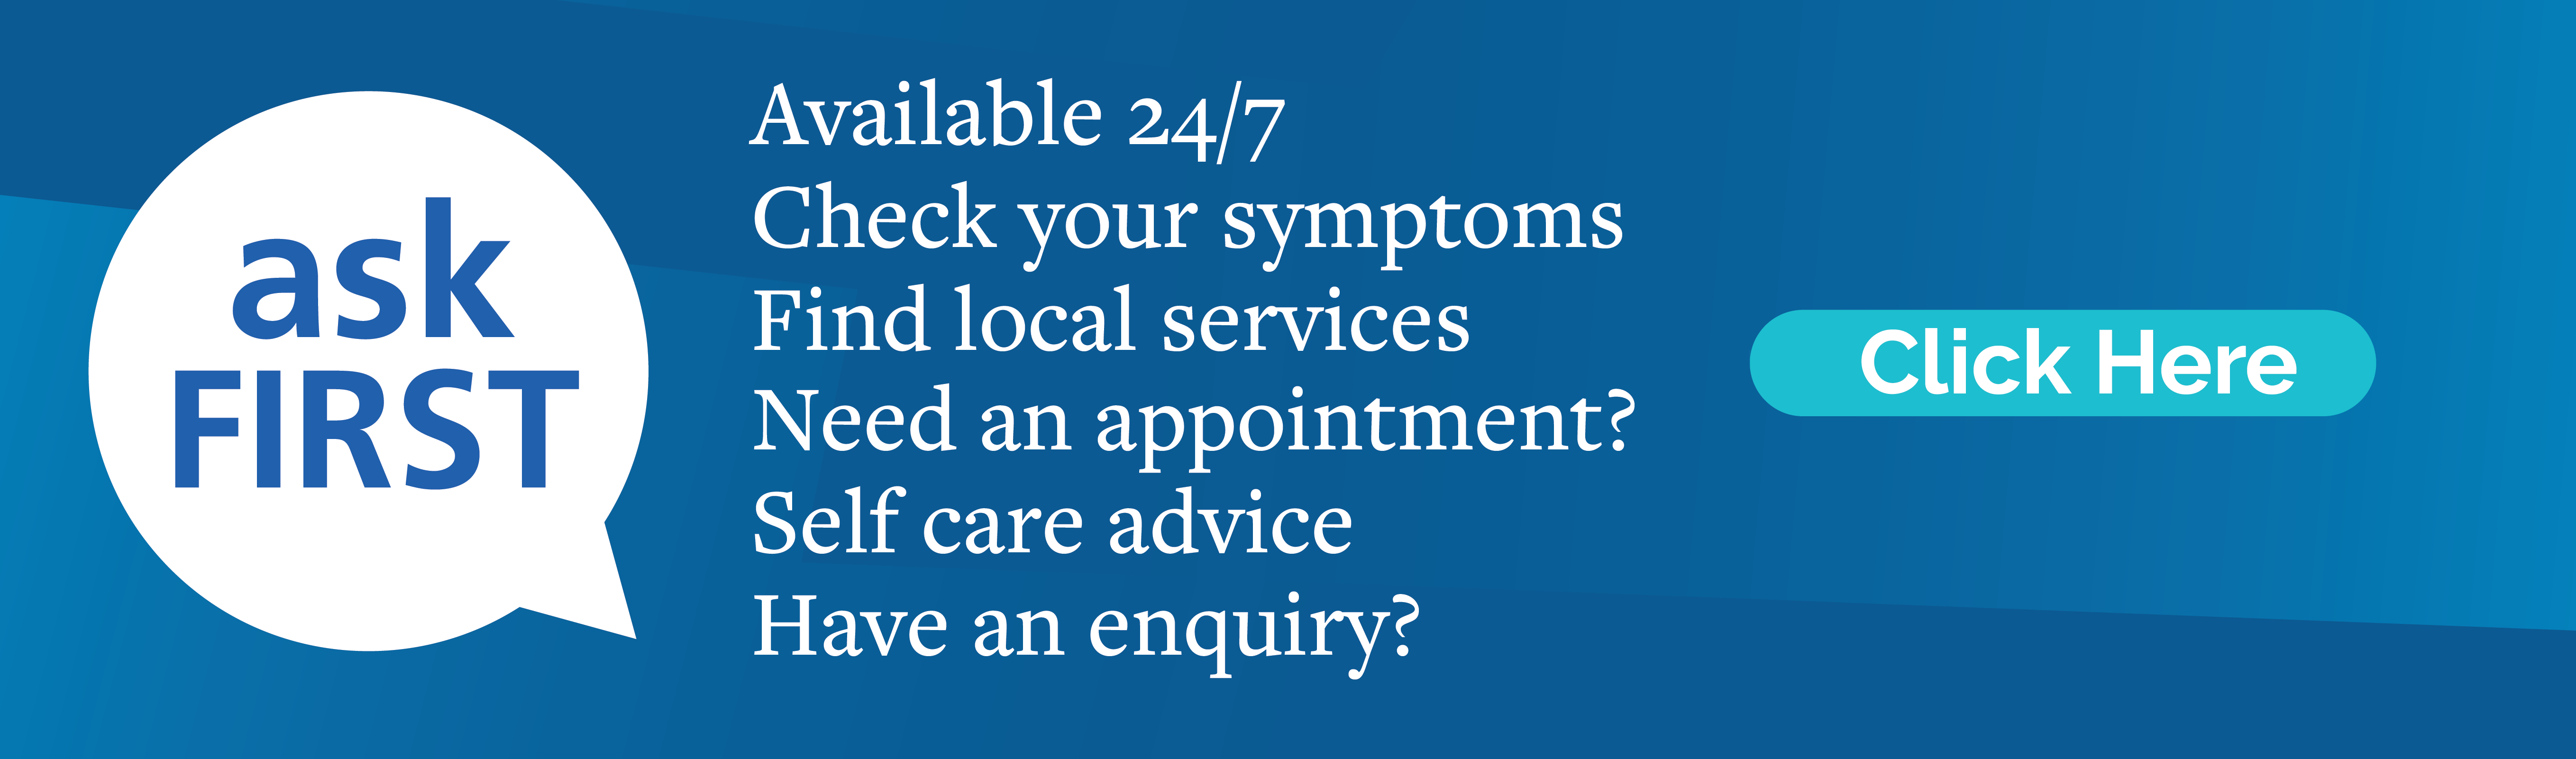 Use Ask First if you need to access NHS services